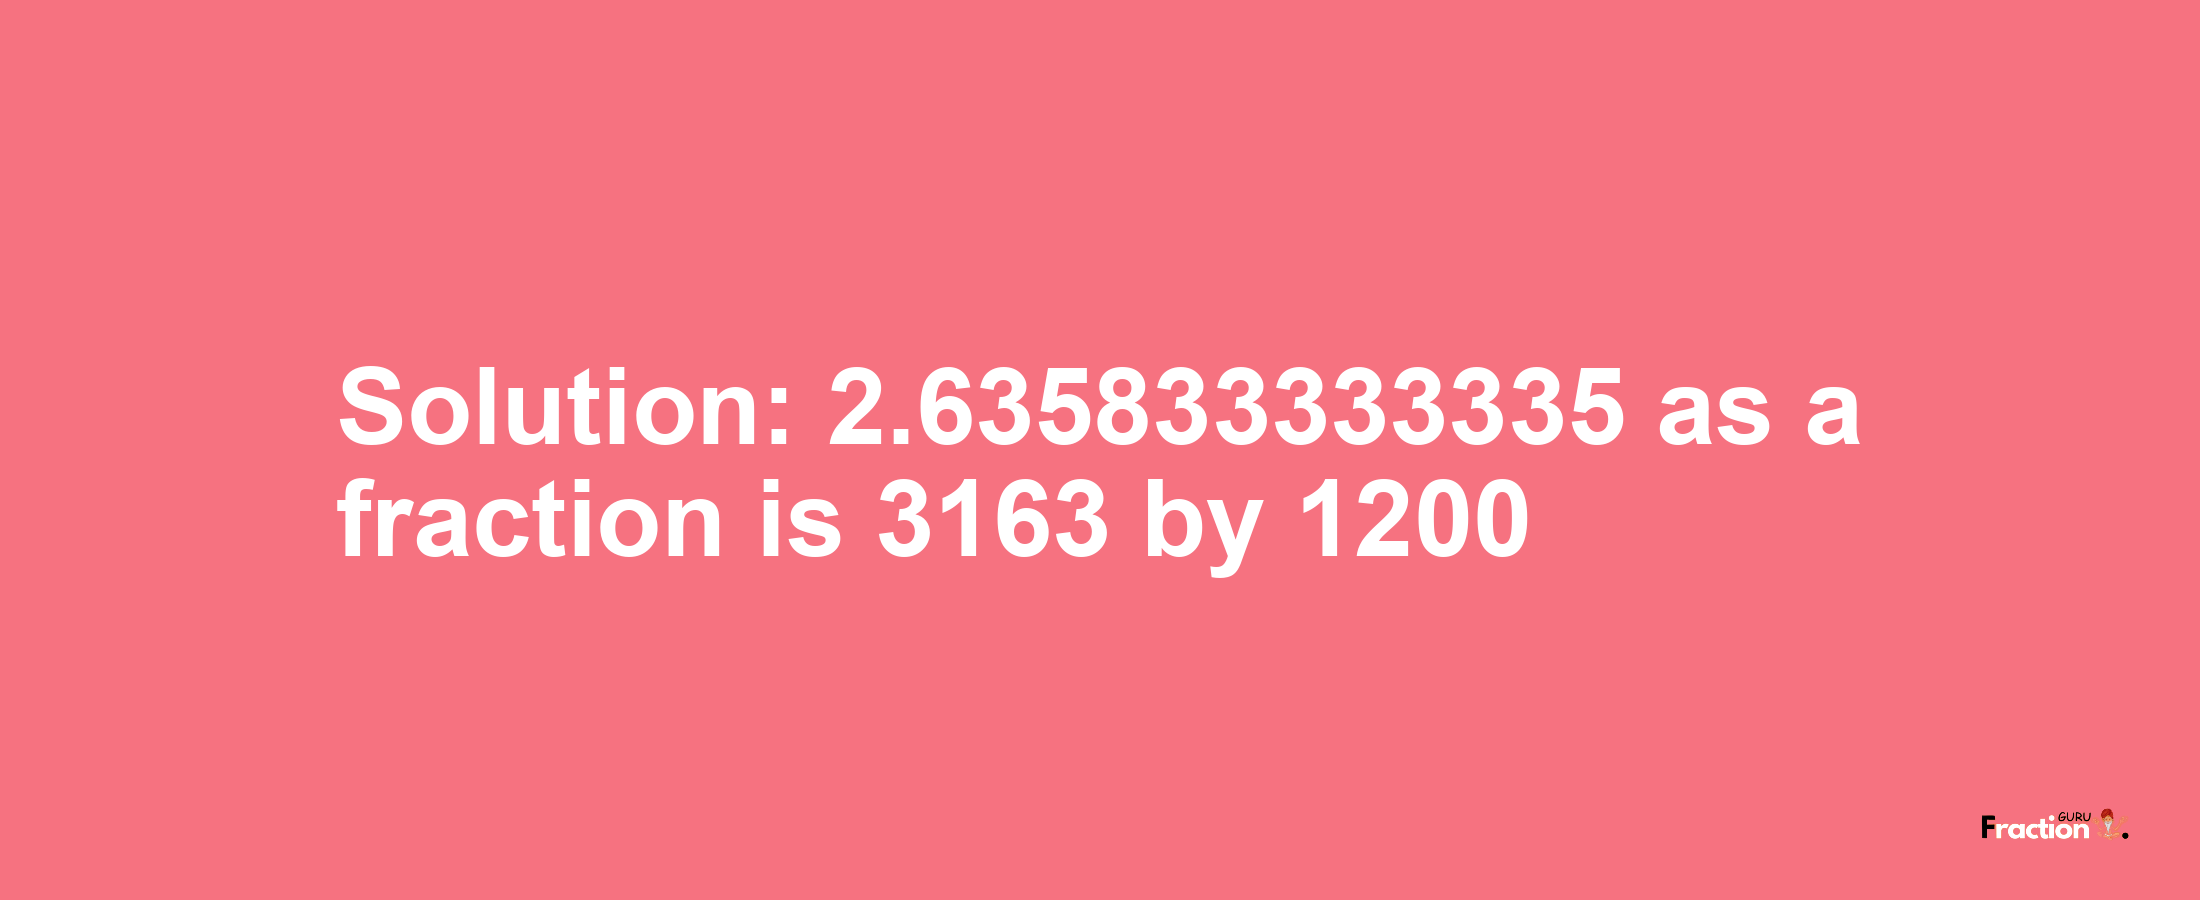 Solution:2.635833333335 as a fraction is 3163/1200